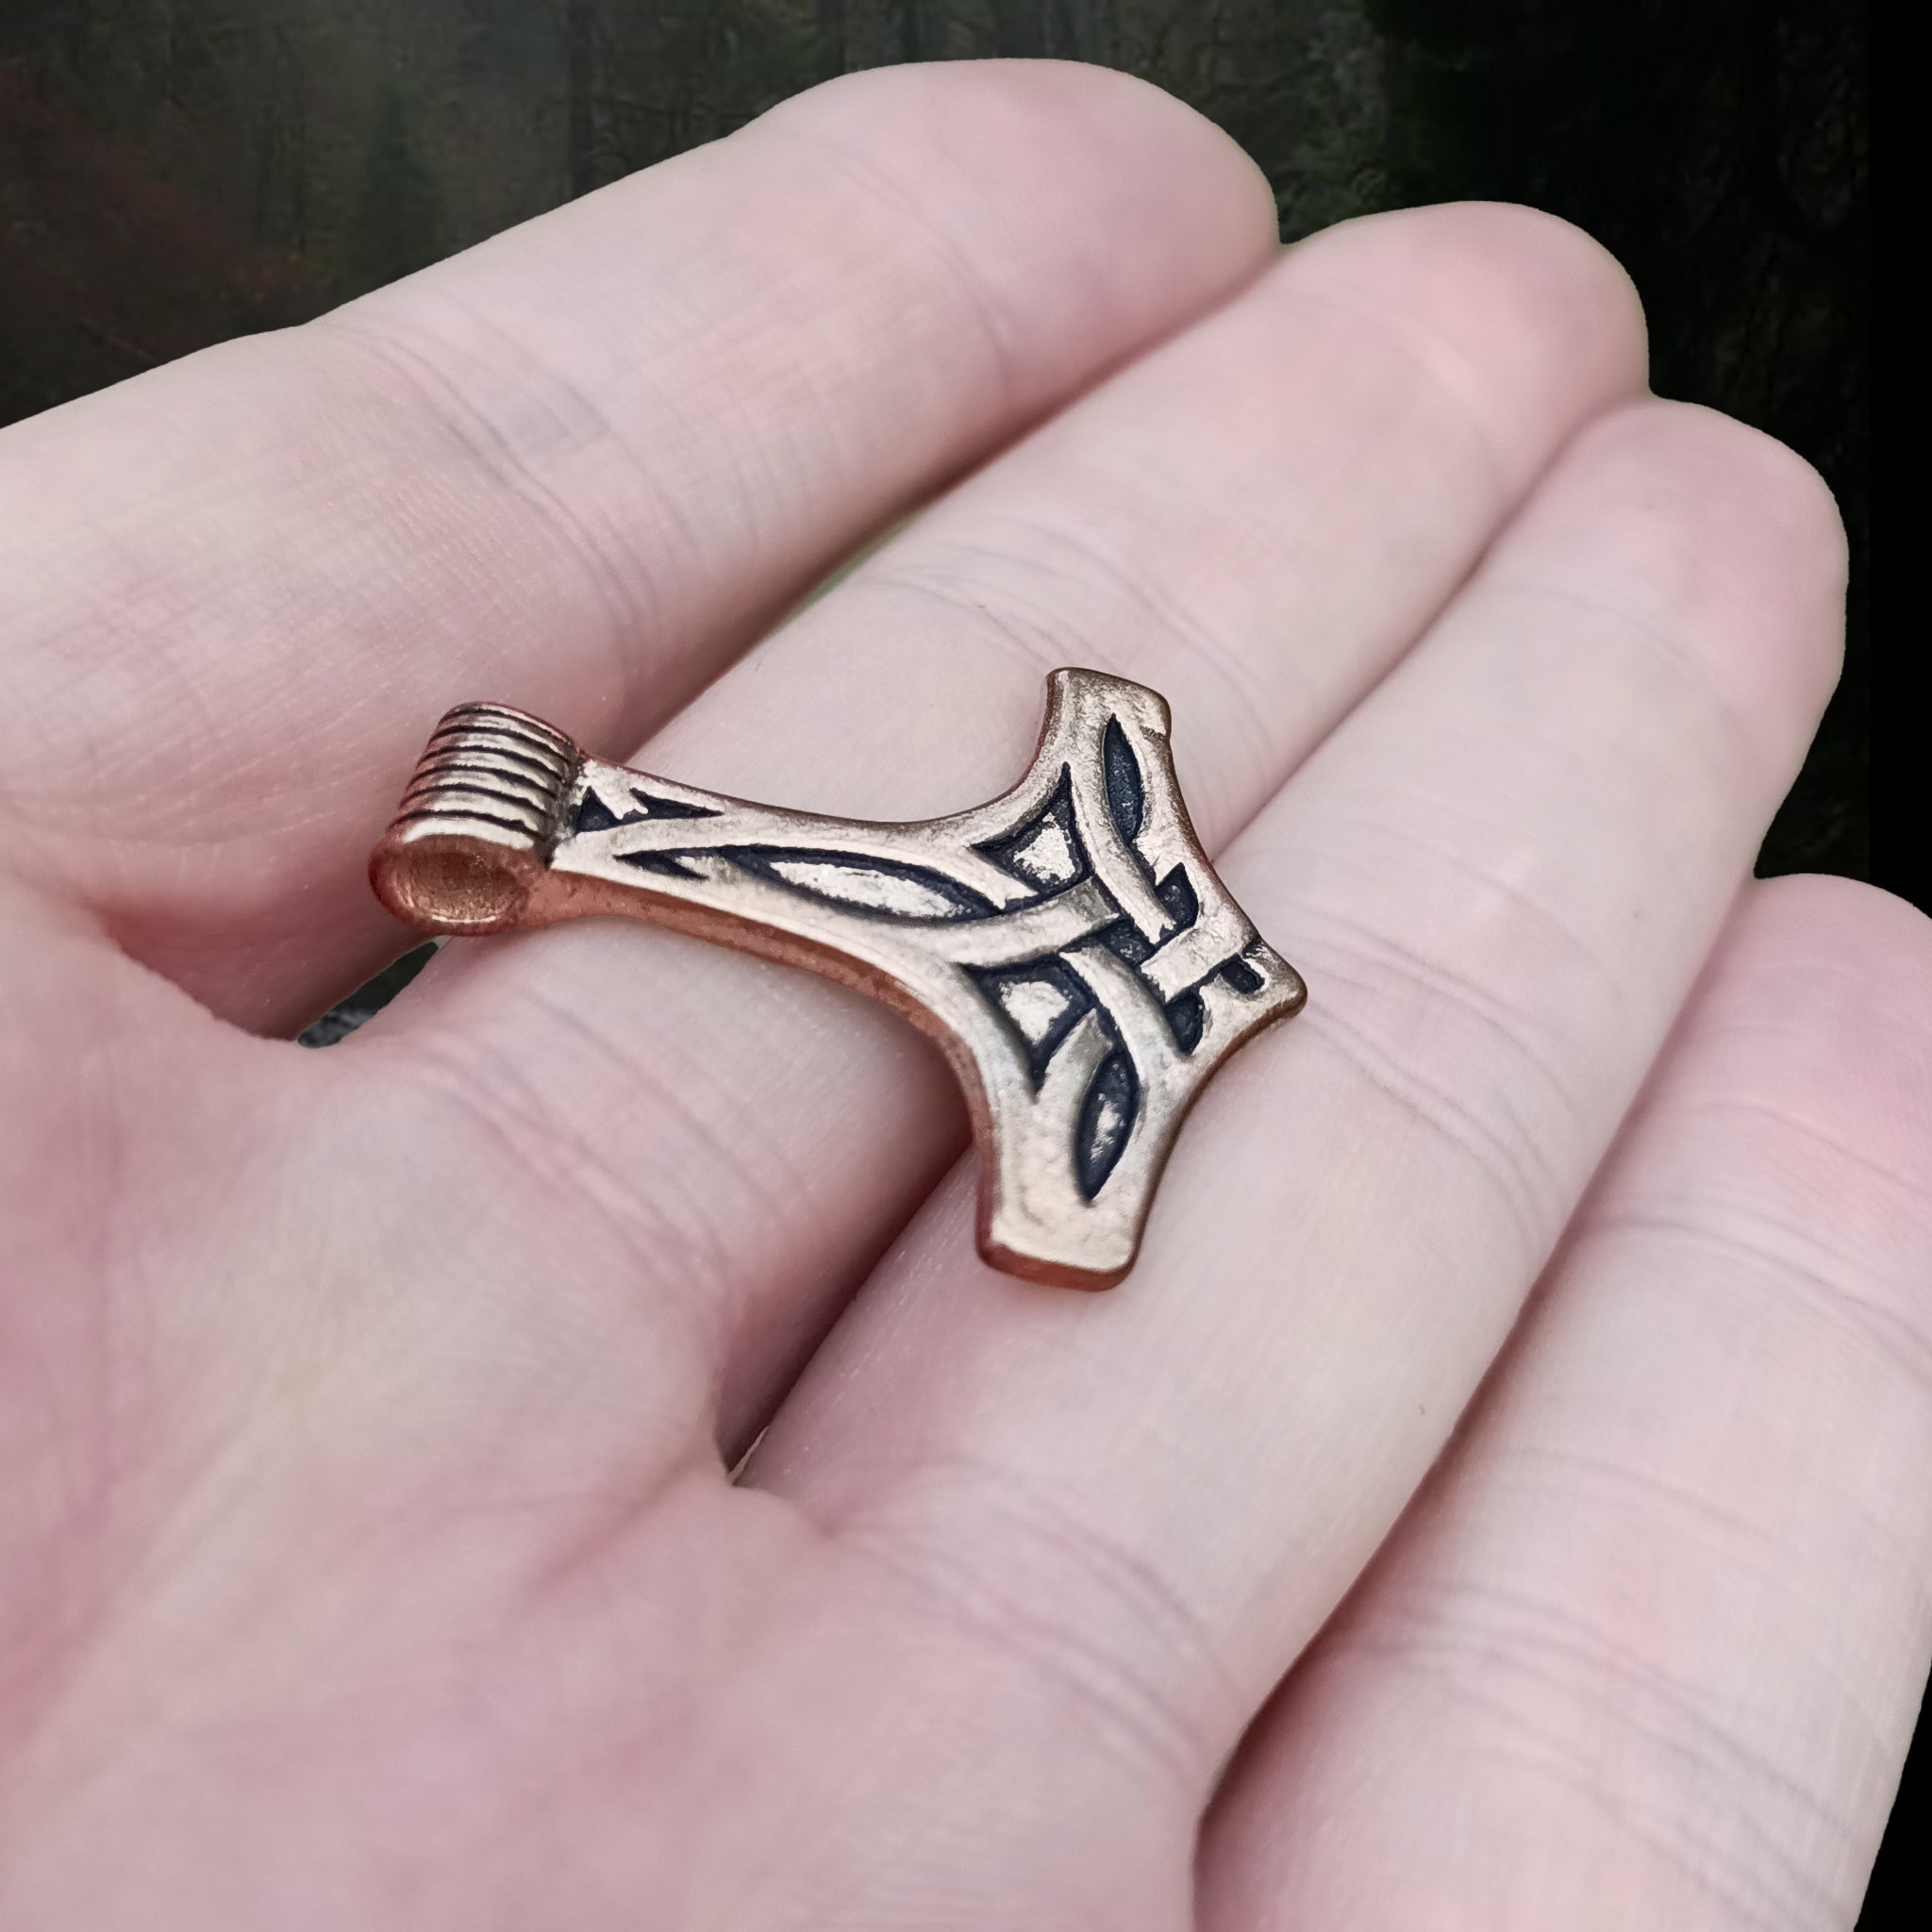 Bronze Thors Hammer Pendant with Knotwork Design on Hand - Side Angle